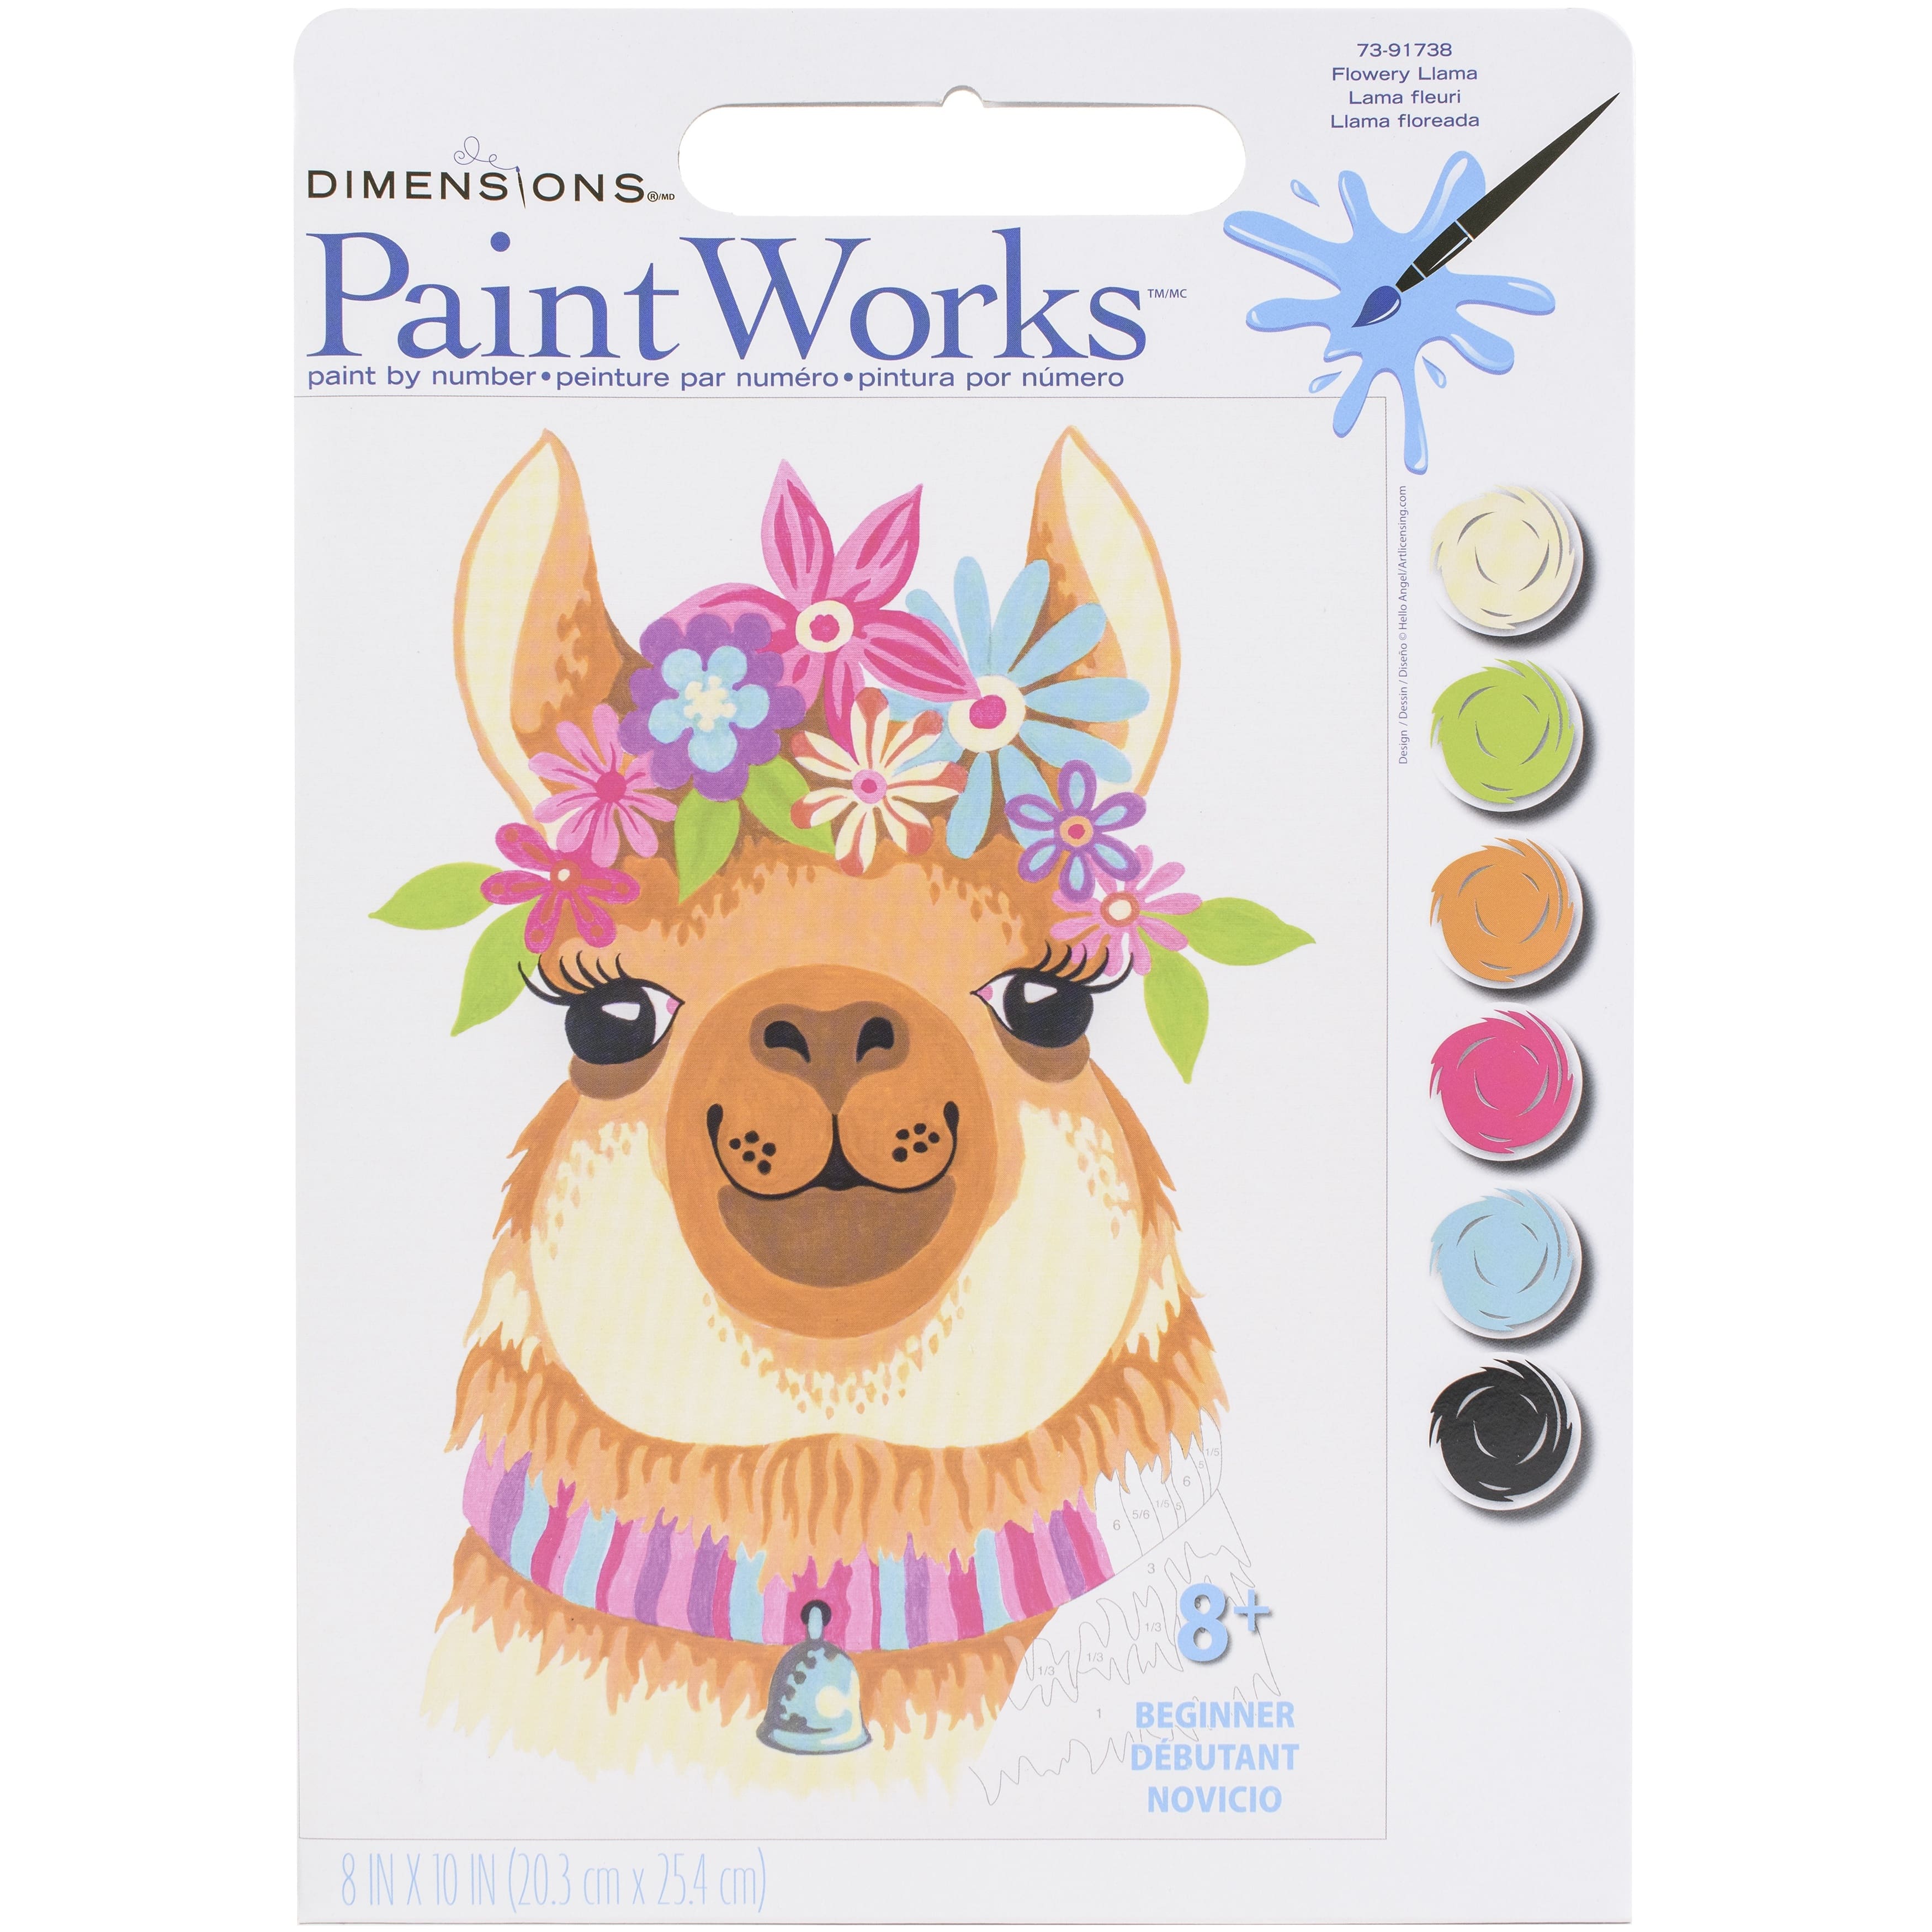 Dimensions&#xAE; PaintWorks&#x2122; Flowery Llama Paint-by-Number Kit